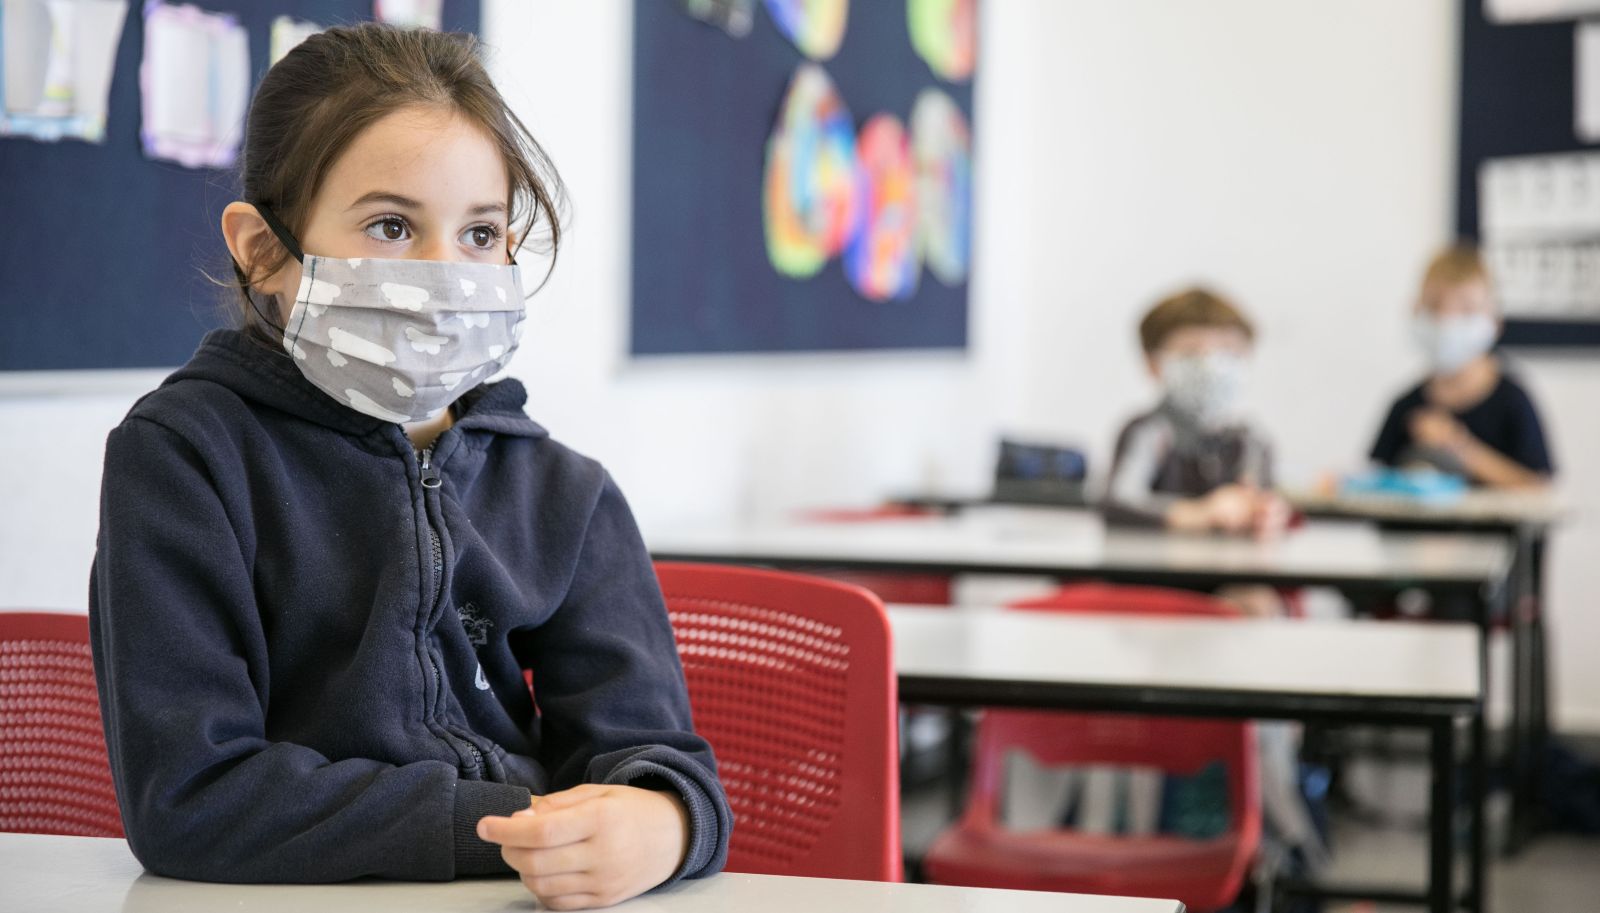 Israeli students wear protective facemasks as they return to school for the first time since the coronavirus outbreak, May 3, 2020. Photo by Olivier Fitoussi/Flash90